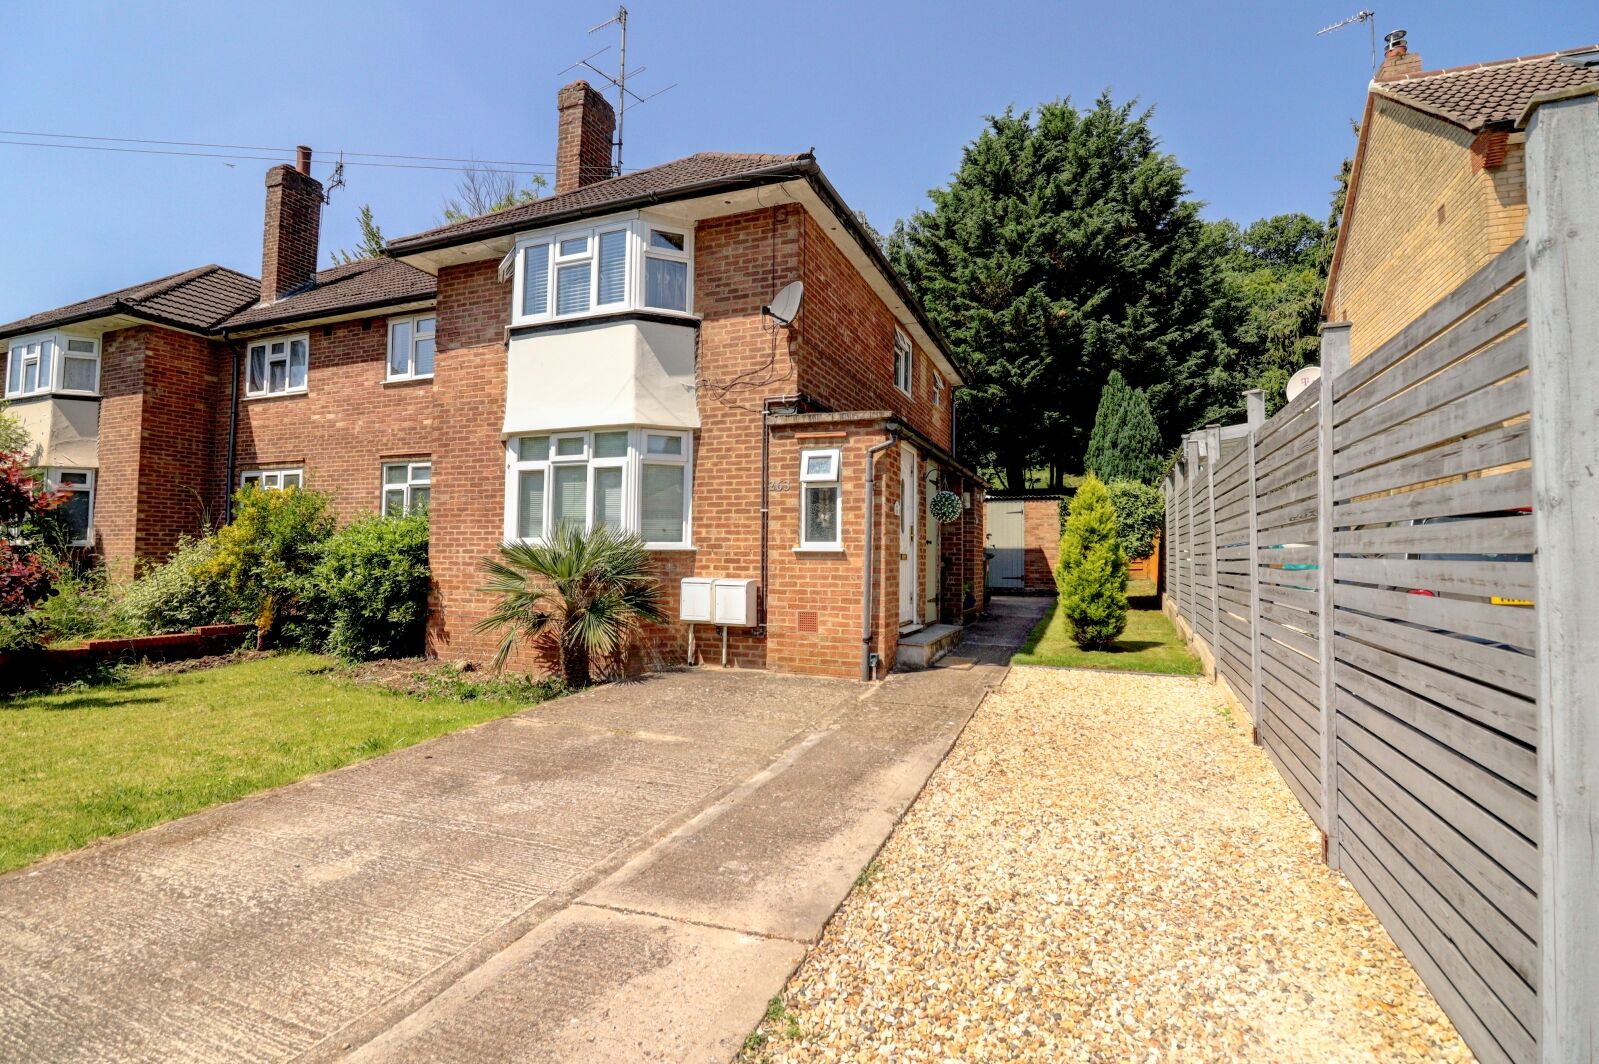 2 bedroom  maisonette for sale Micklefield Road, High Wycombe, HP13, main image